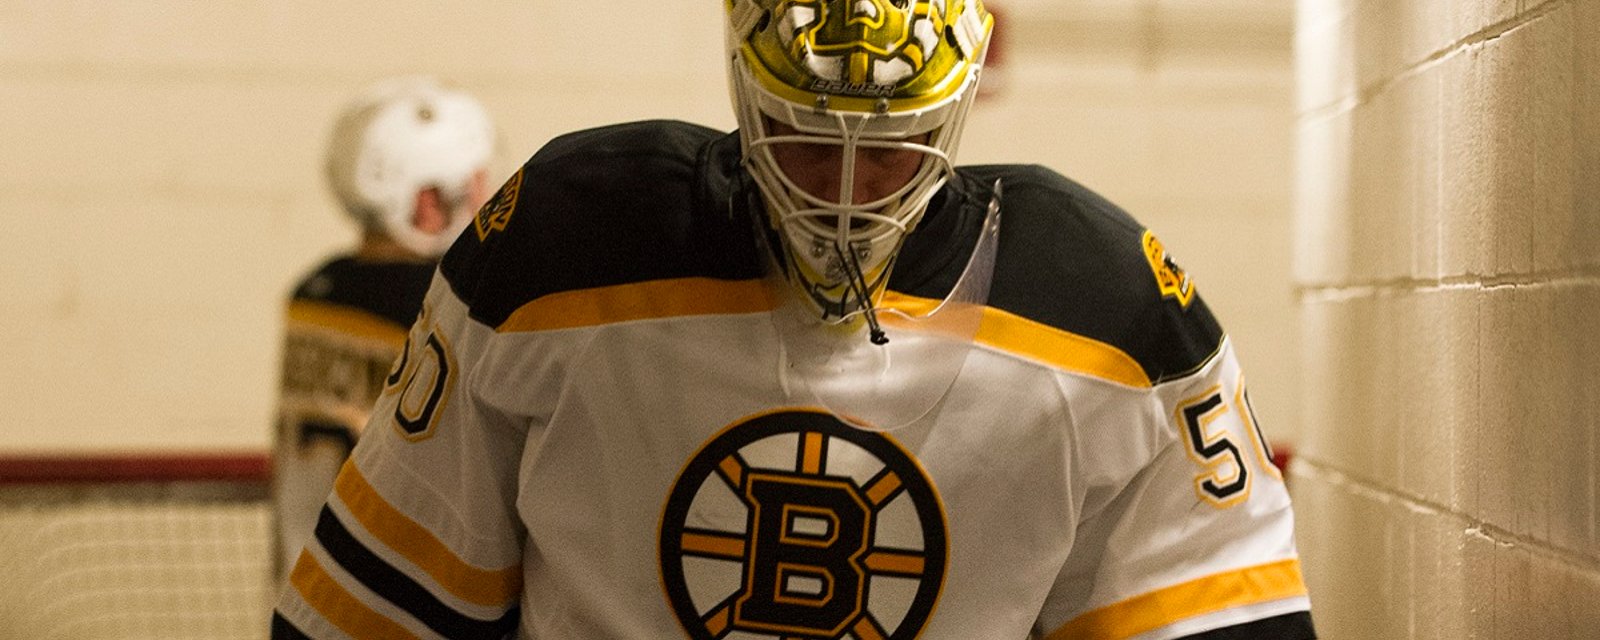 Breaking: Tuukka Rask is OUT for Game 1.